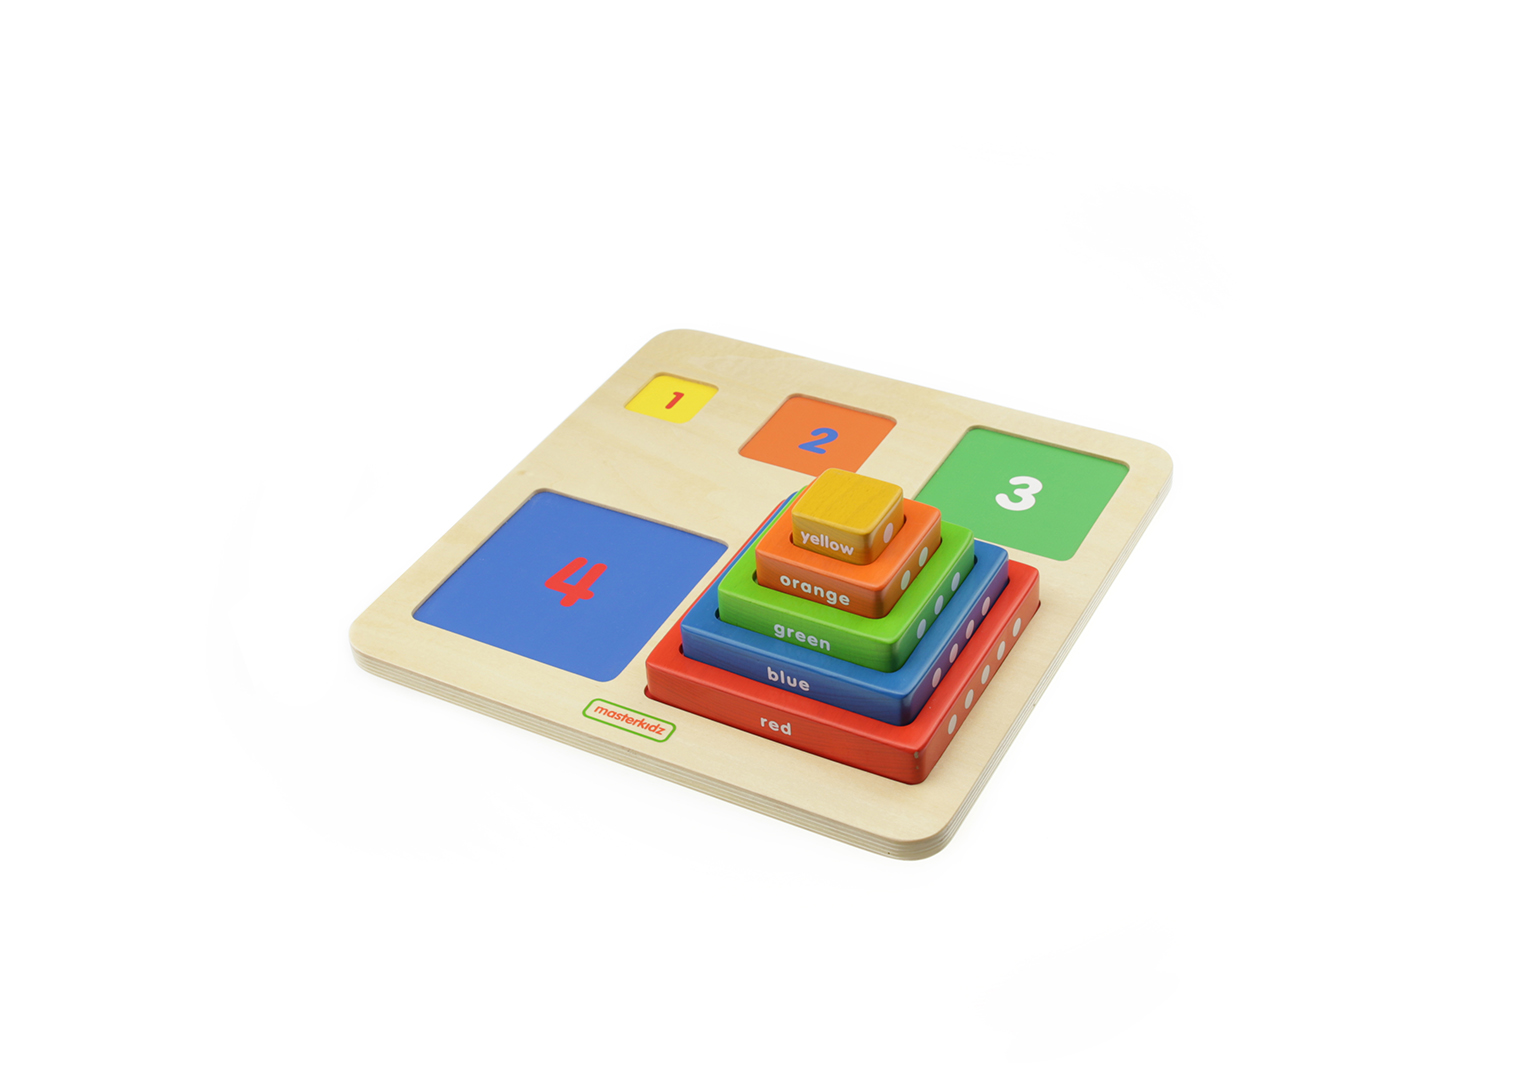 Numbers and Colours Stacking Blocks